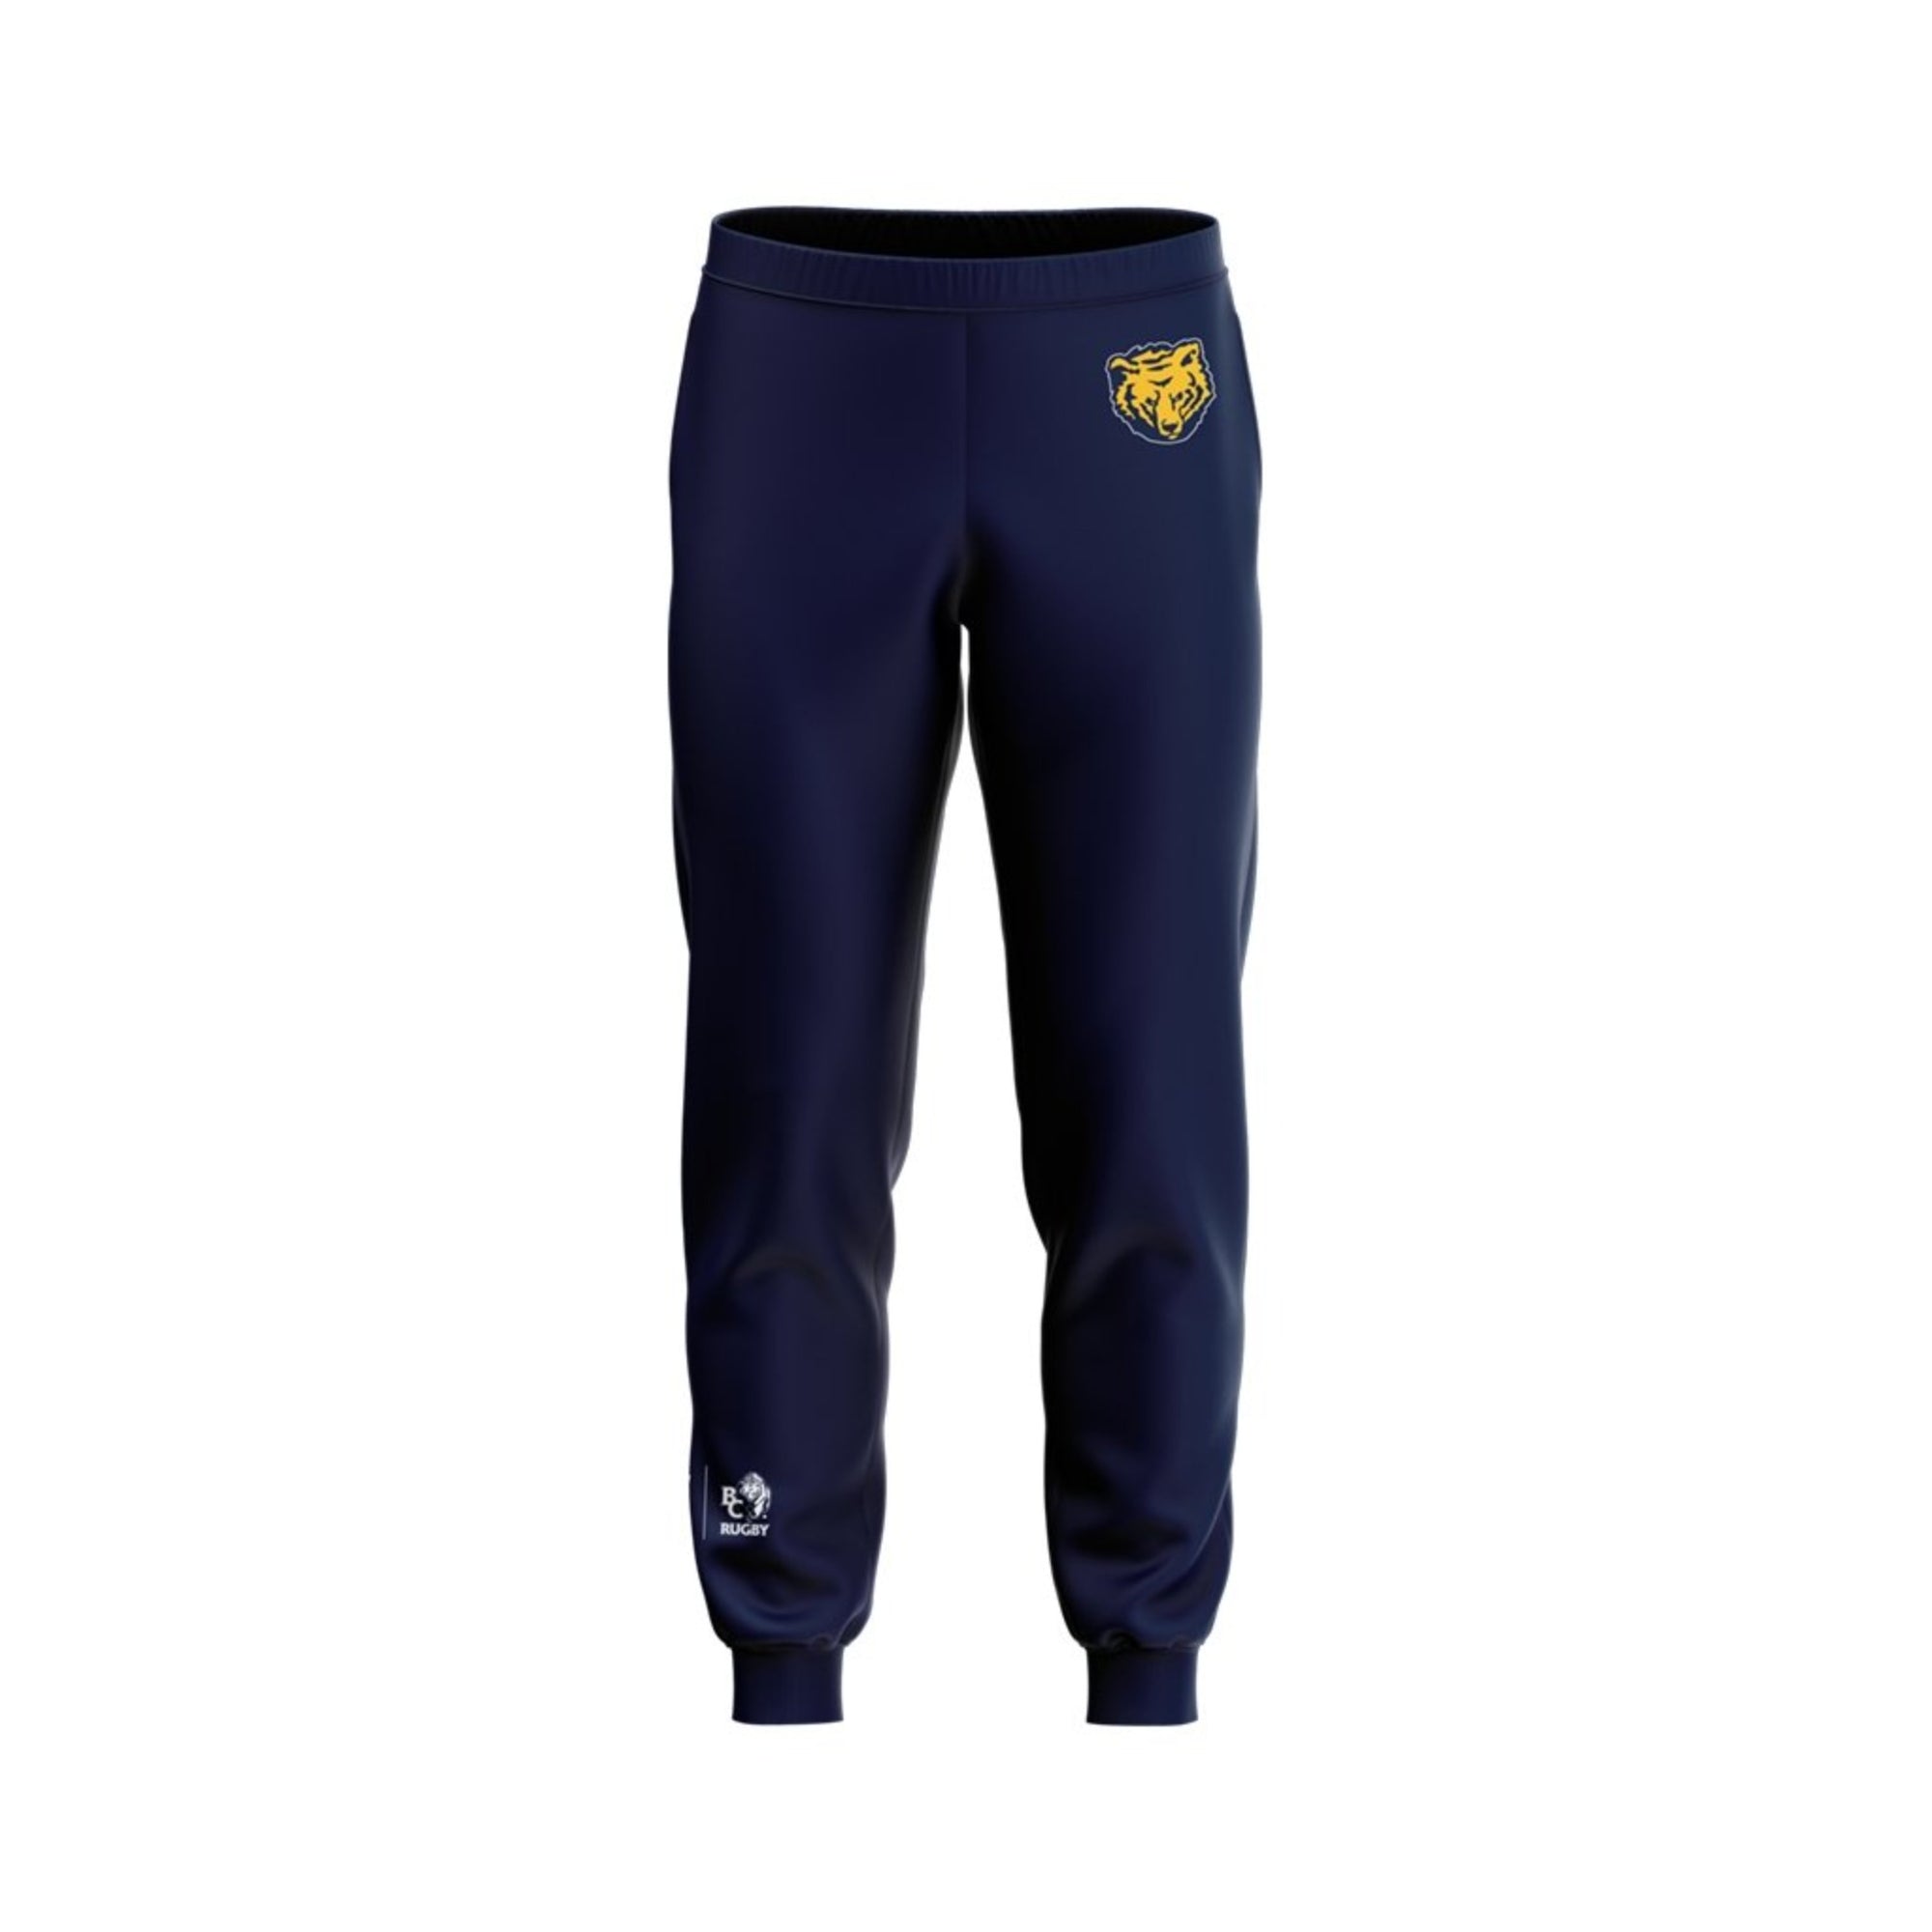 BC Rugby 2022 Bears Sweat Pants - www.therugbyshop.com www.therugbyshop.com MEN'S / DARK NAVY / S XIX Brands PANTS BC Rugby 2022 Bears Sweat Pants